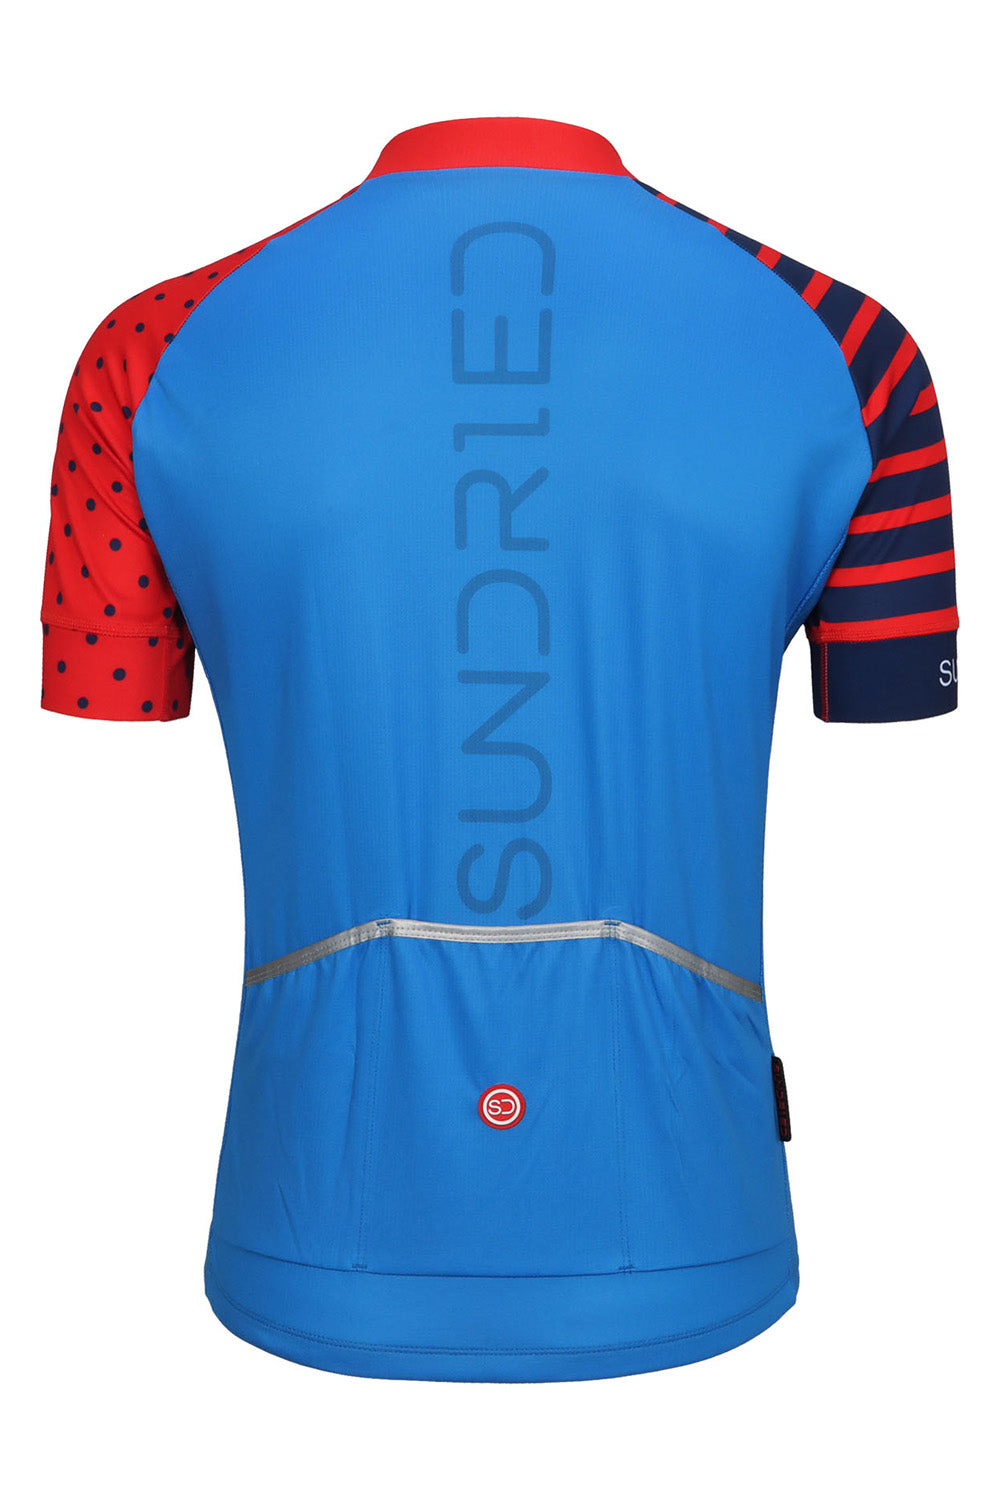 Sundried Spots and Stripes Men's Short Sleeve Cycle Jersey Short Sleeve Jersey Activewear